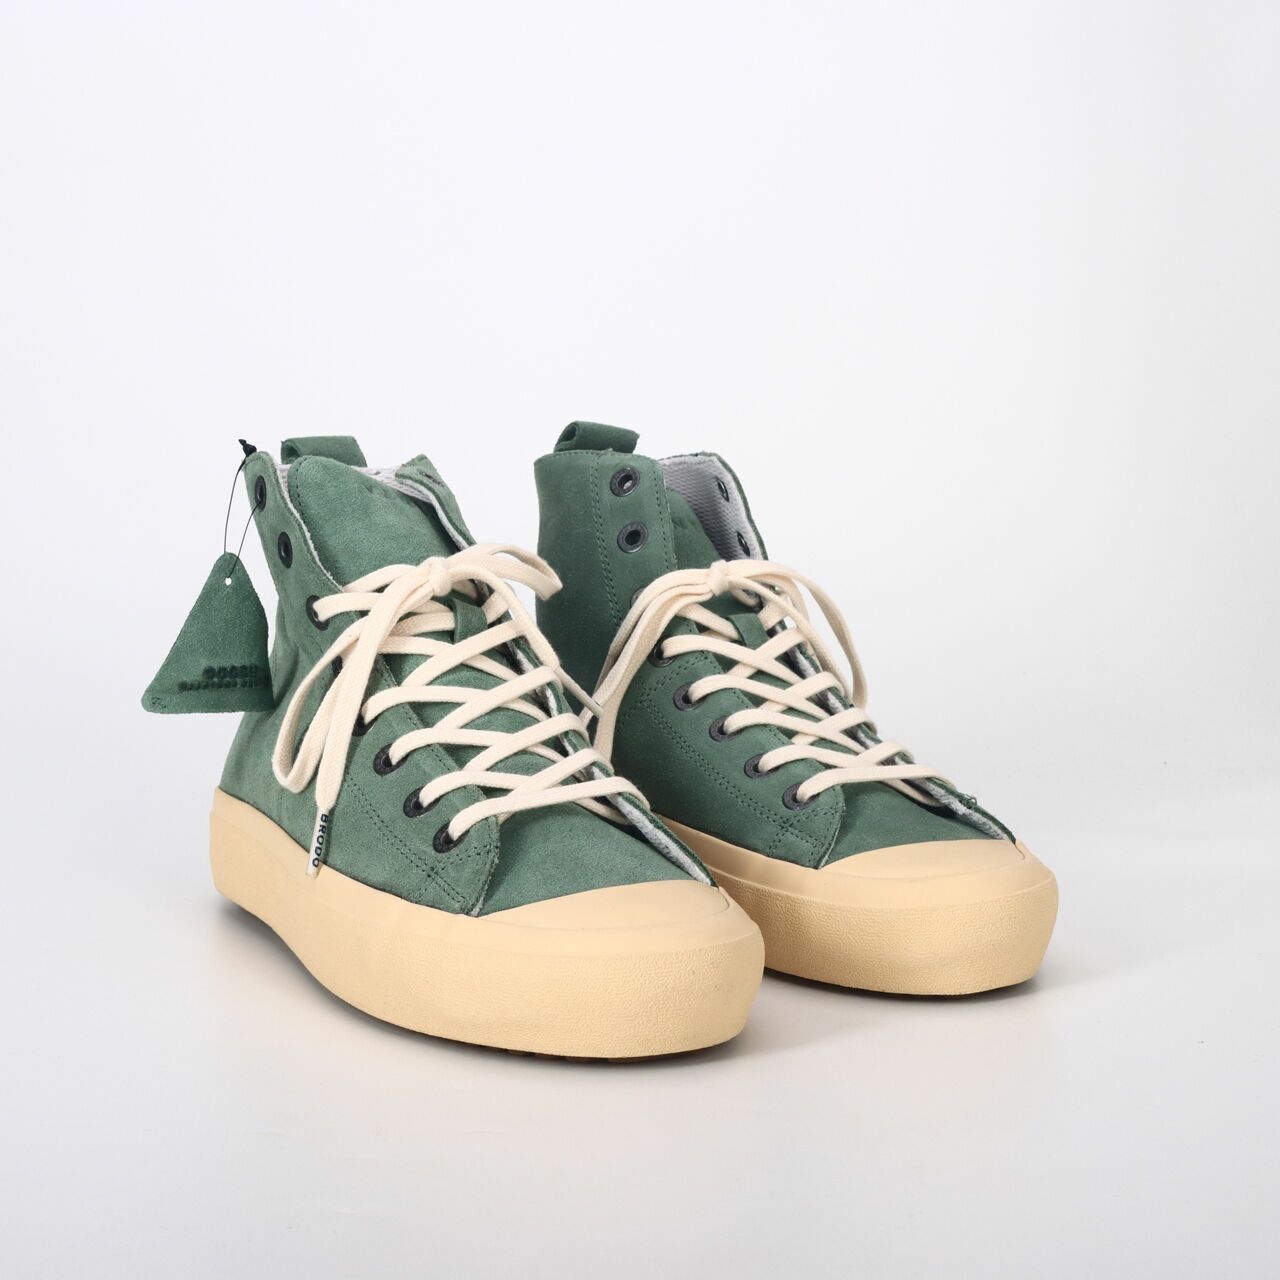 Brodo Wasabi VTG V.2 50 Shades Of Suede Sneakers